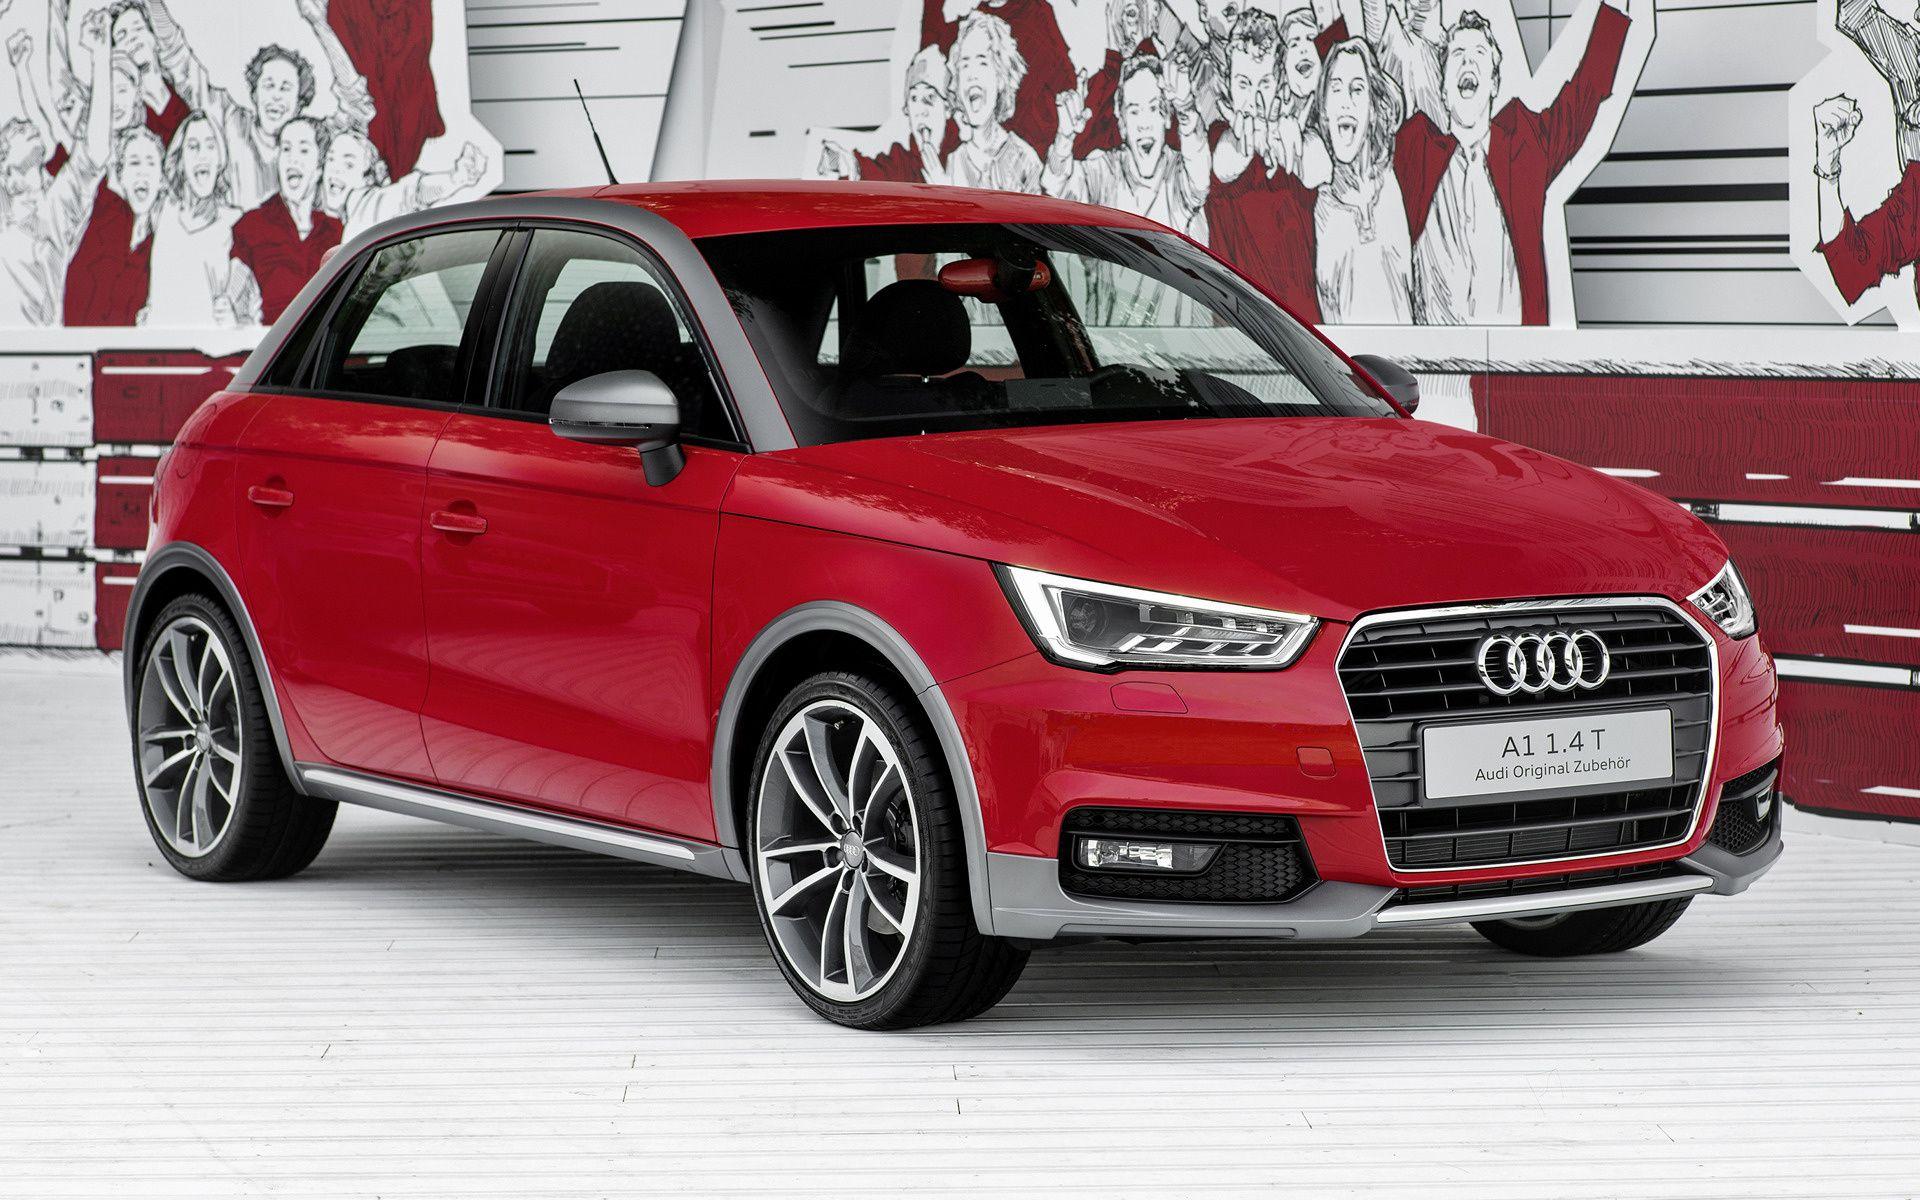 Audi A1 Sportback with Genuine Accessories (2015) Wallpaper